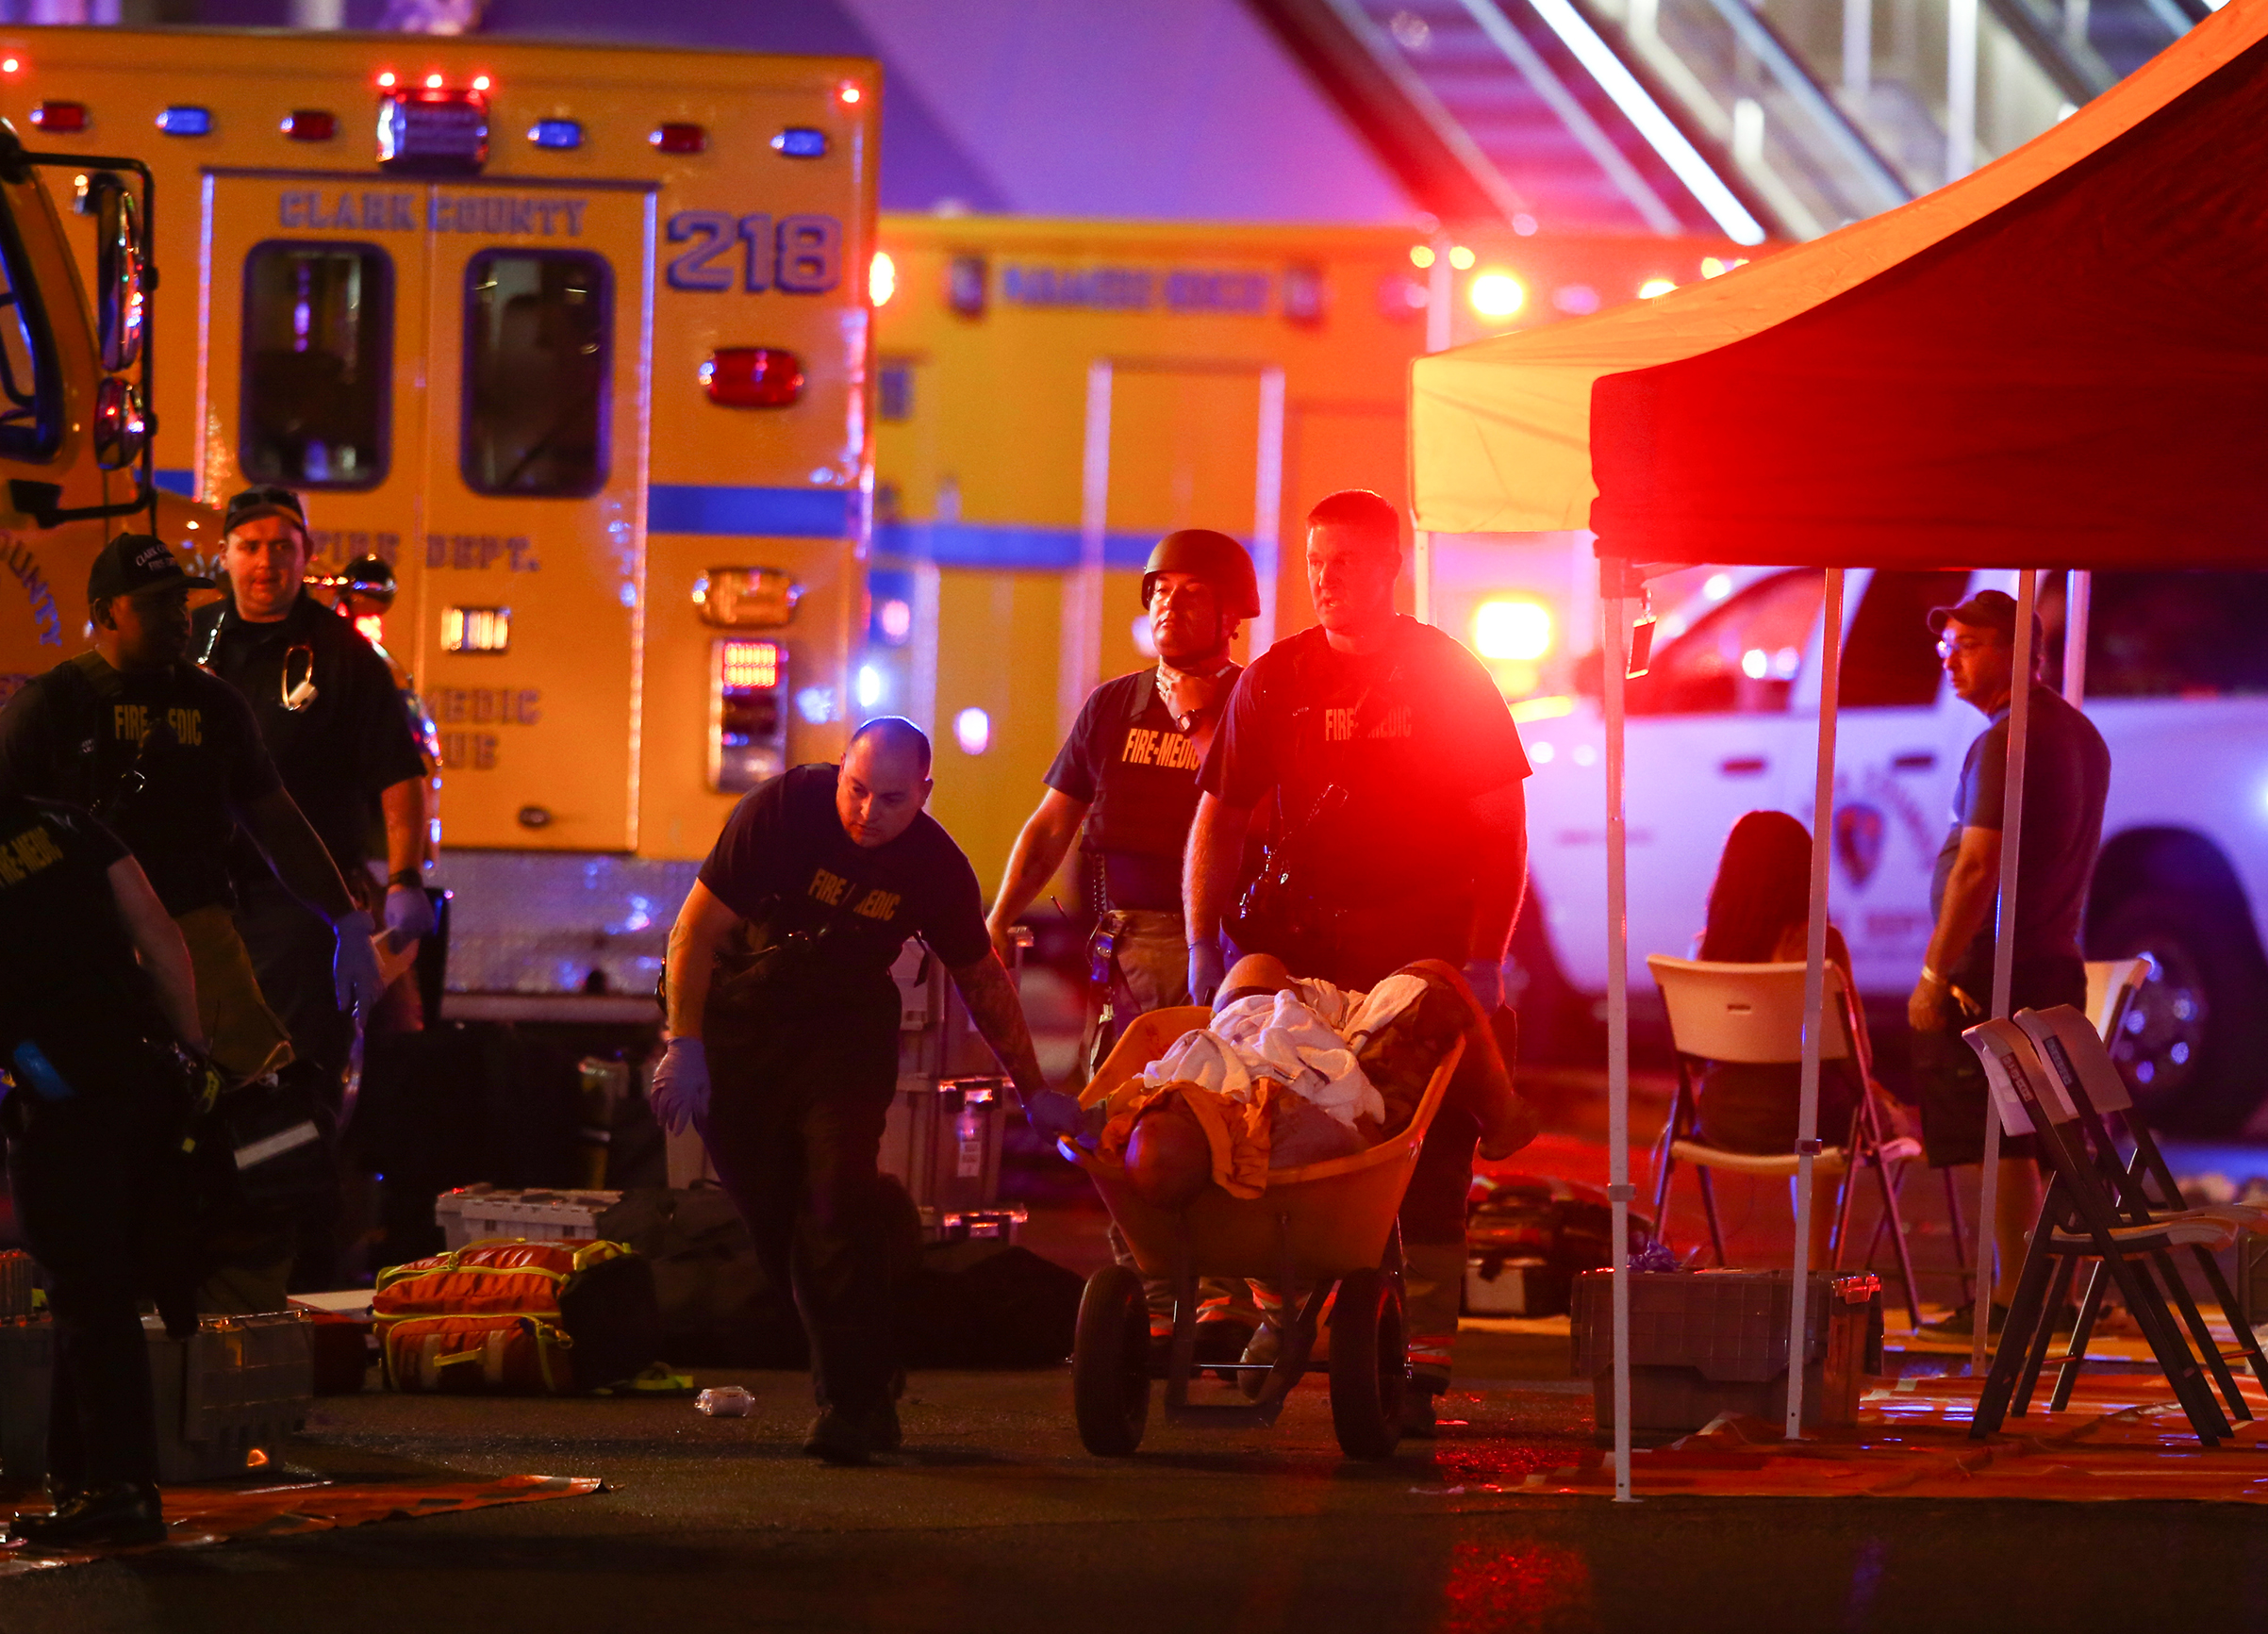 A wounded person is transported in a wheelbarrow after a mass shooting at a music festival in Las Vegas on Oct. 1, 2017. (Chase Stevens—Las Vegas Review-Journal/AP)